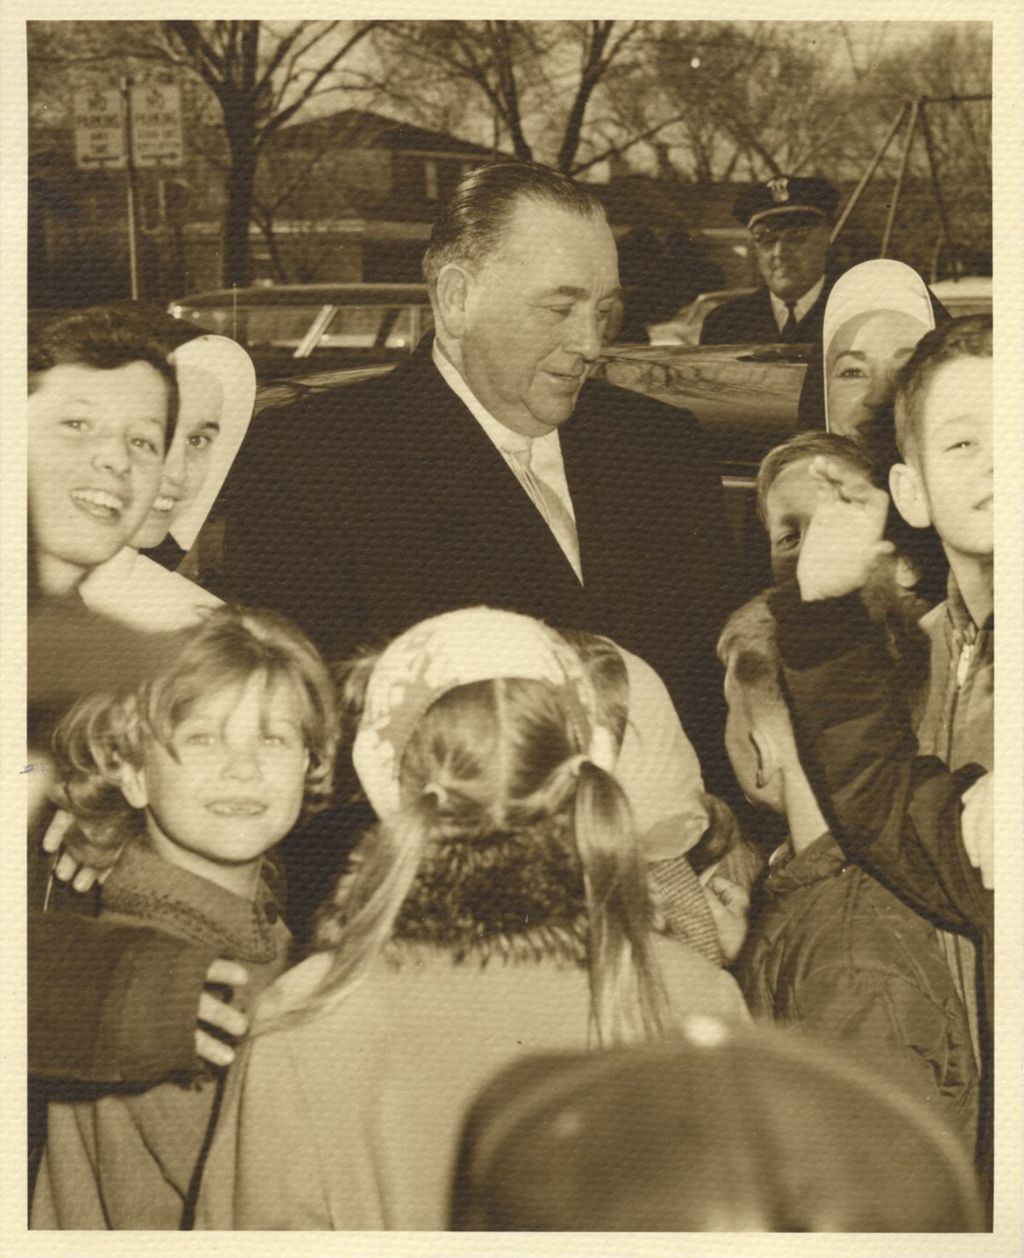 Richard J. Daley with children and nuns